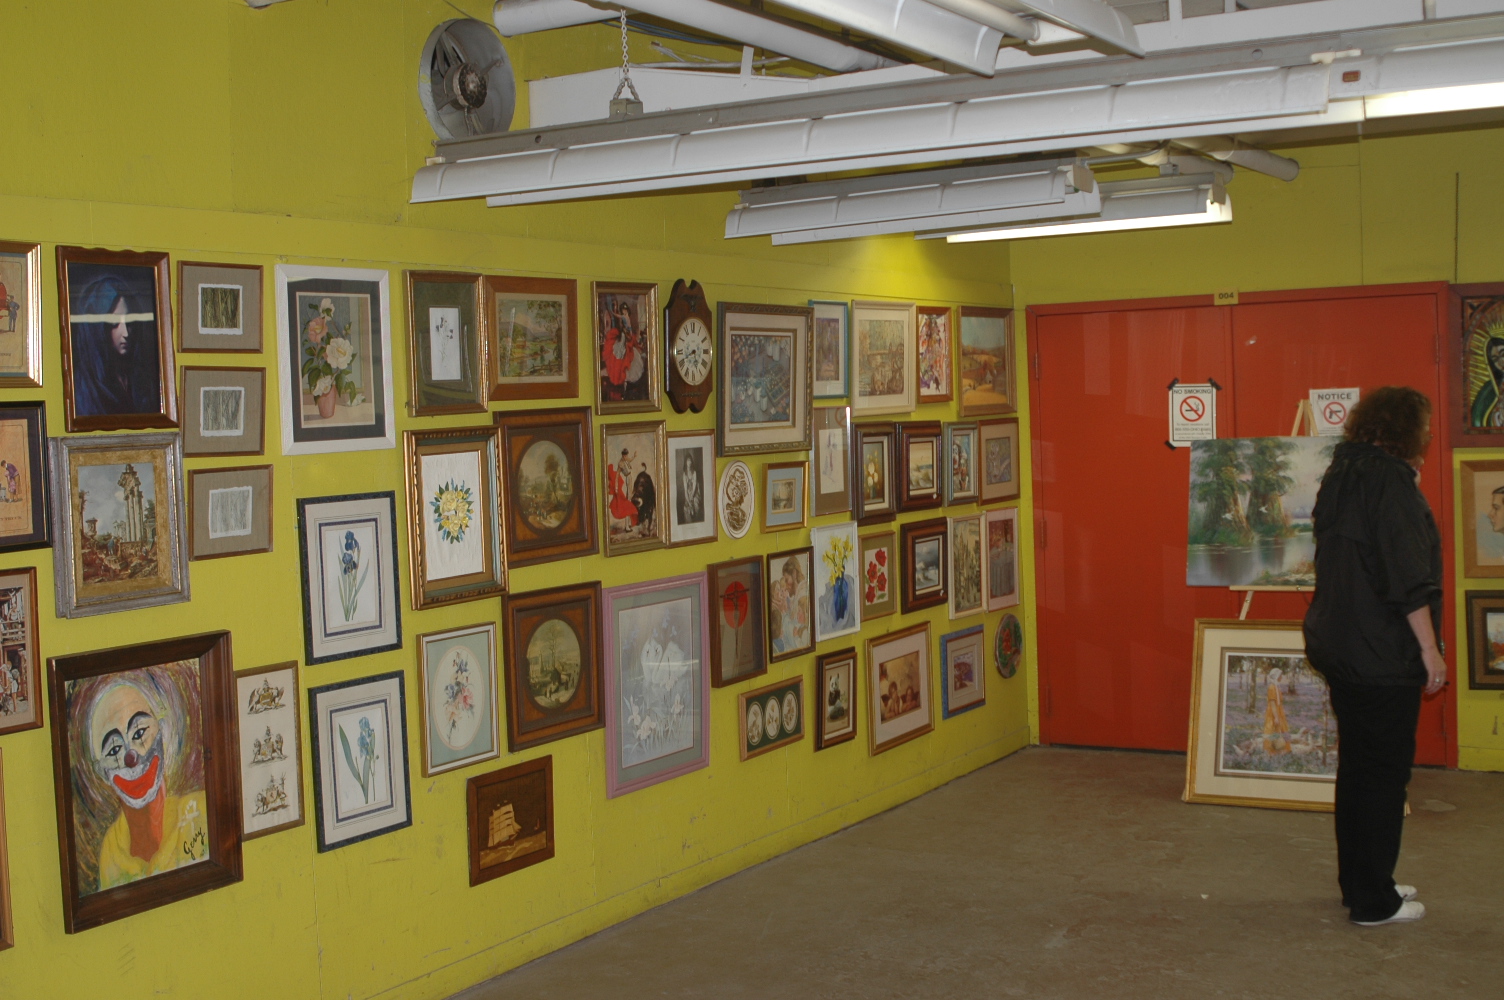 Grossman Auction Pictures From May 17, 2013 - 1305 West 80th Street